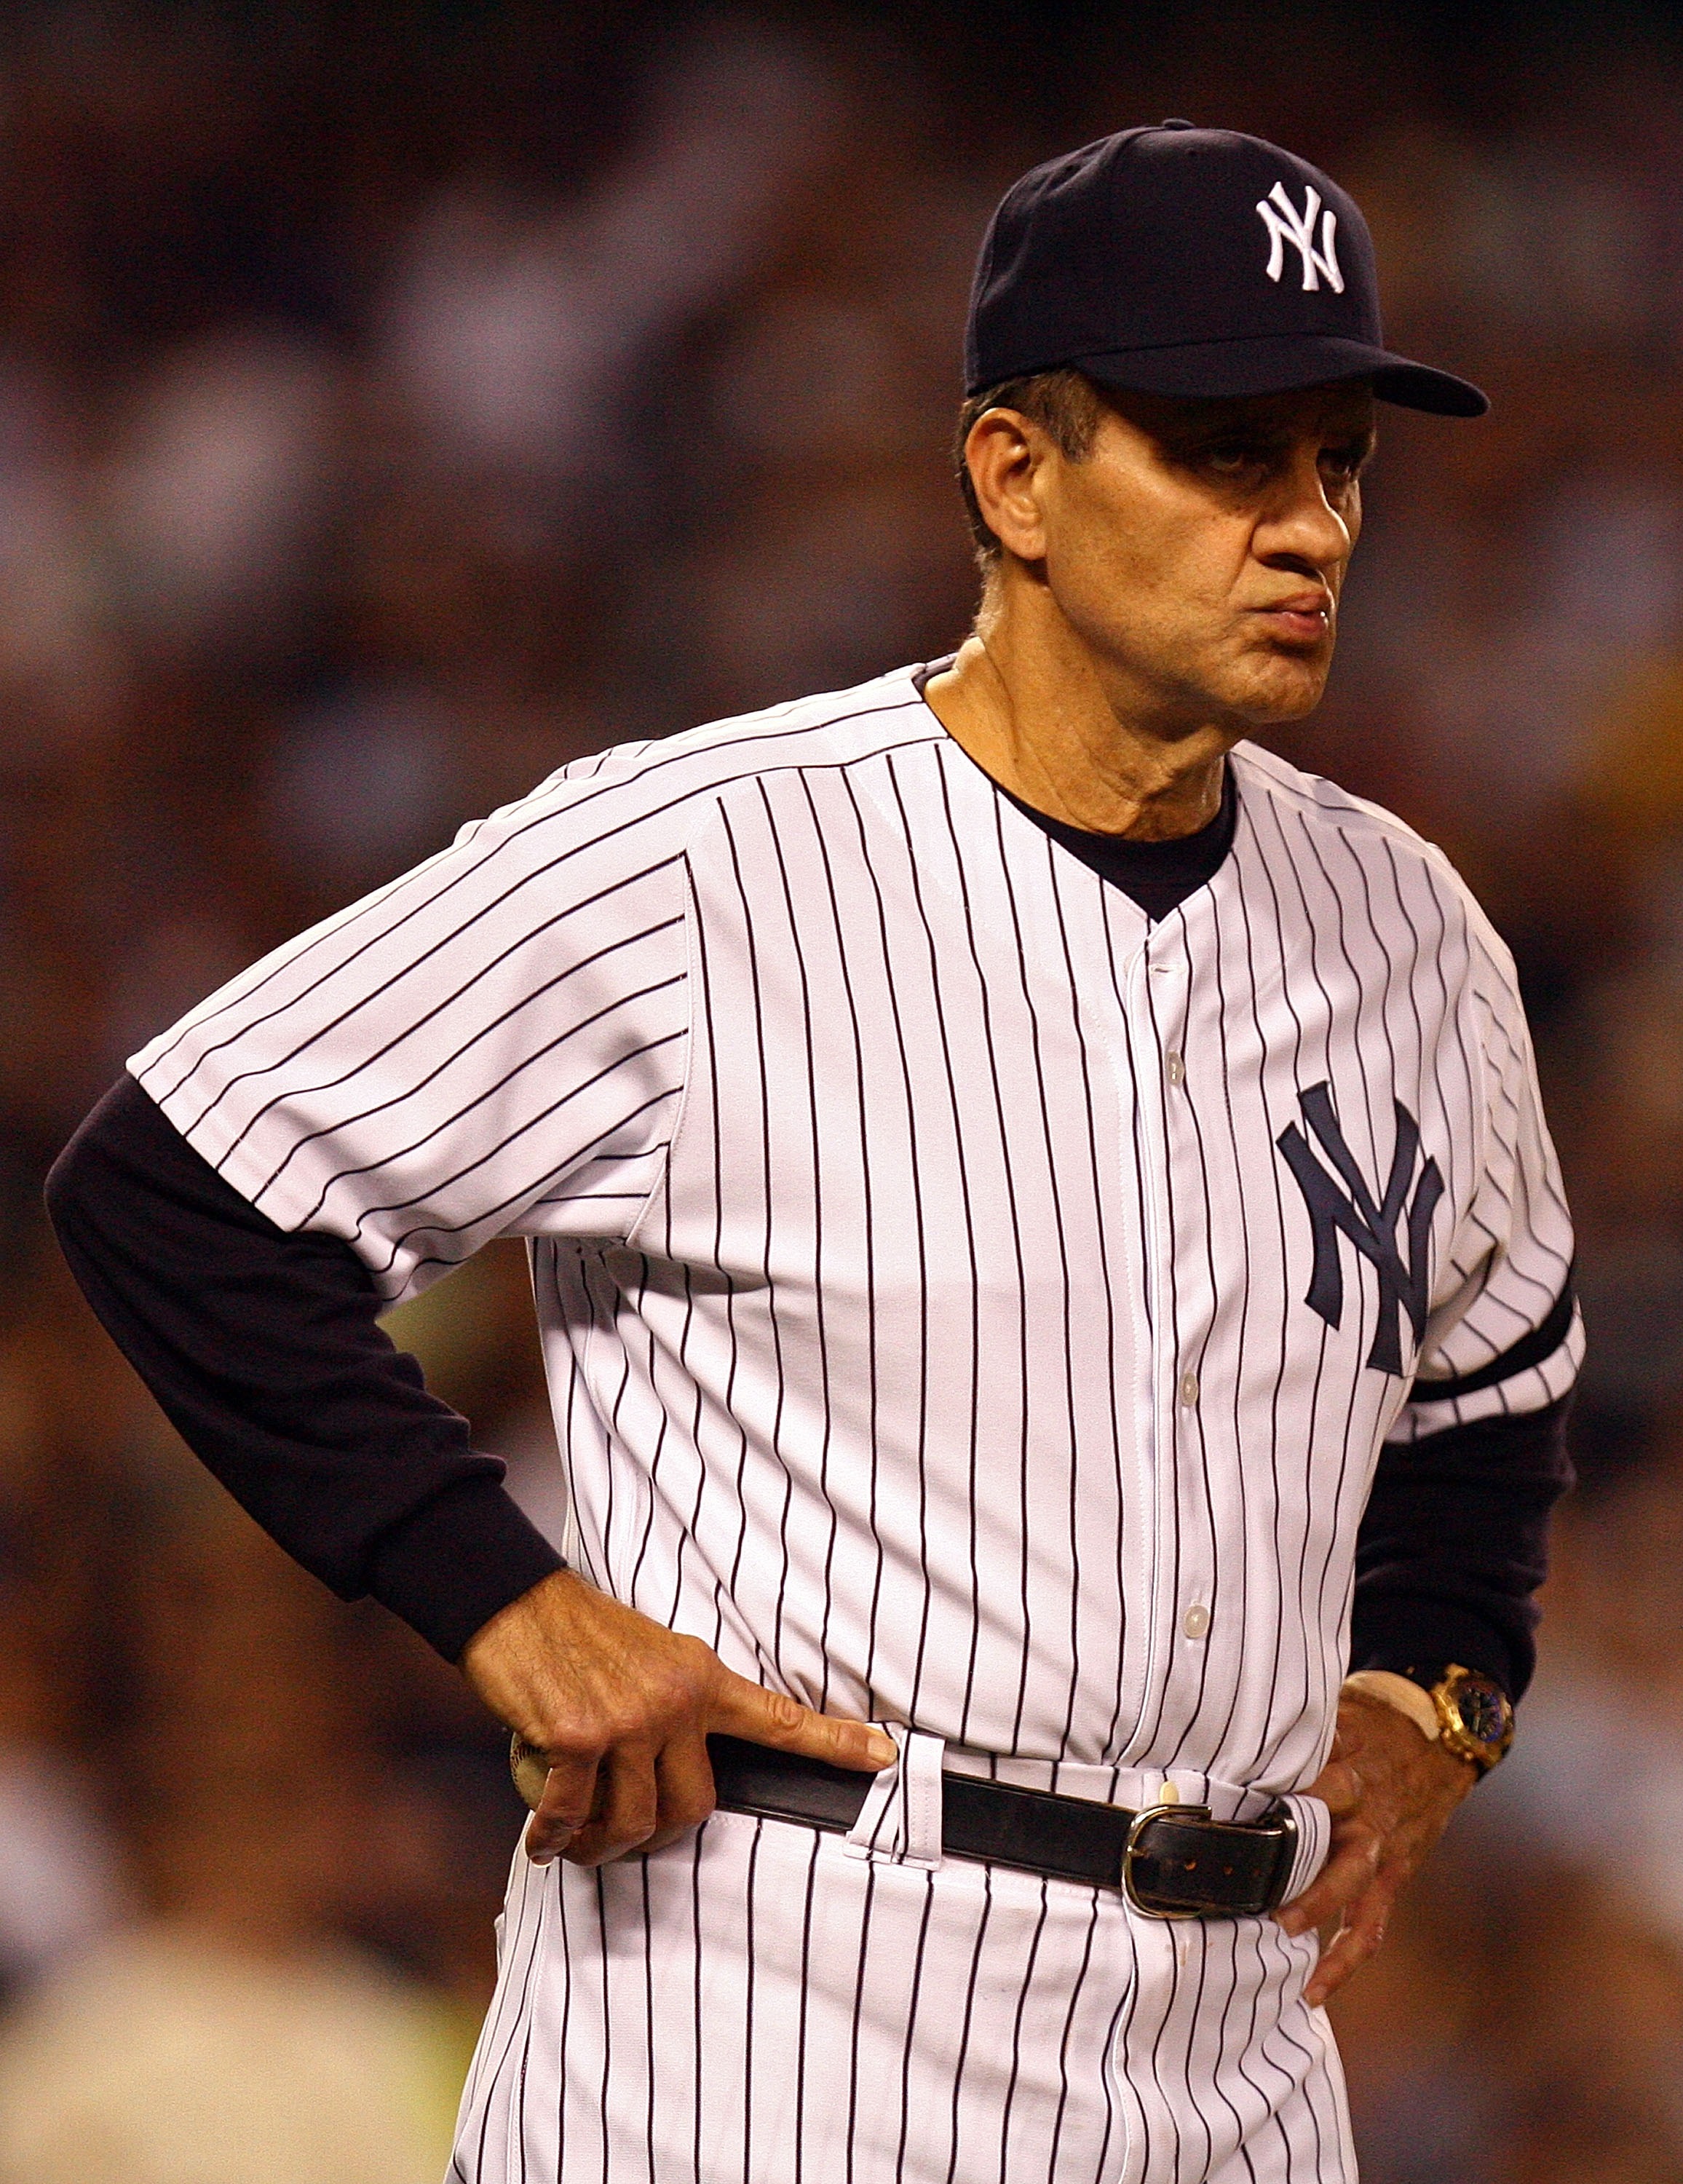 NEW YORK - OCTOBER 08:  Manager Joe Torre #6 of the New York Yankees stands on the field against the Cleveland Indians during Game Four of the American League Division Series at Yankee Stadium on October 8, 2007 in the Bronx borough of New York City.  (Ph